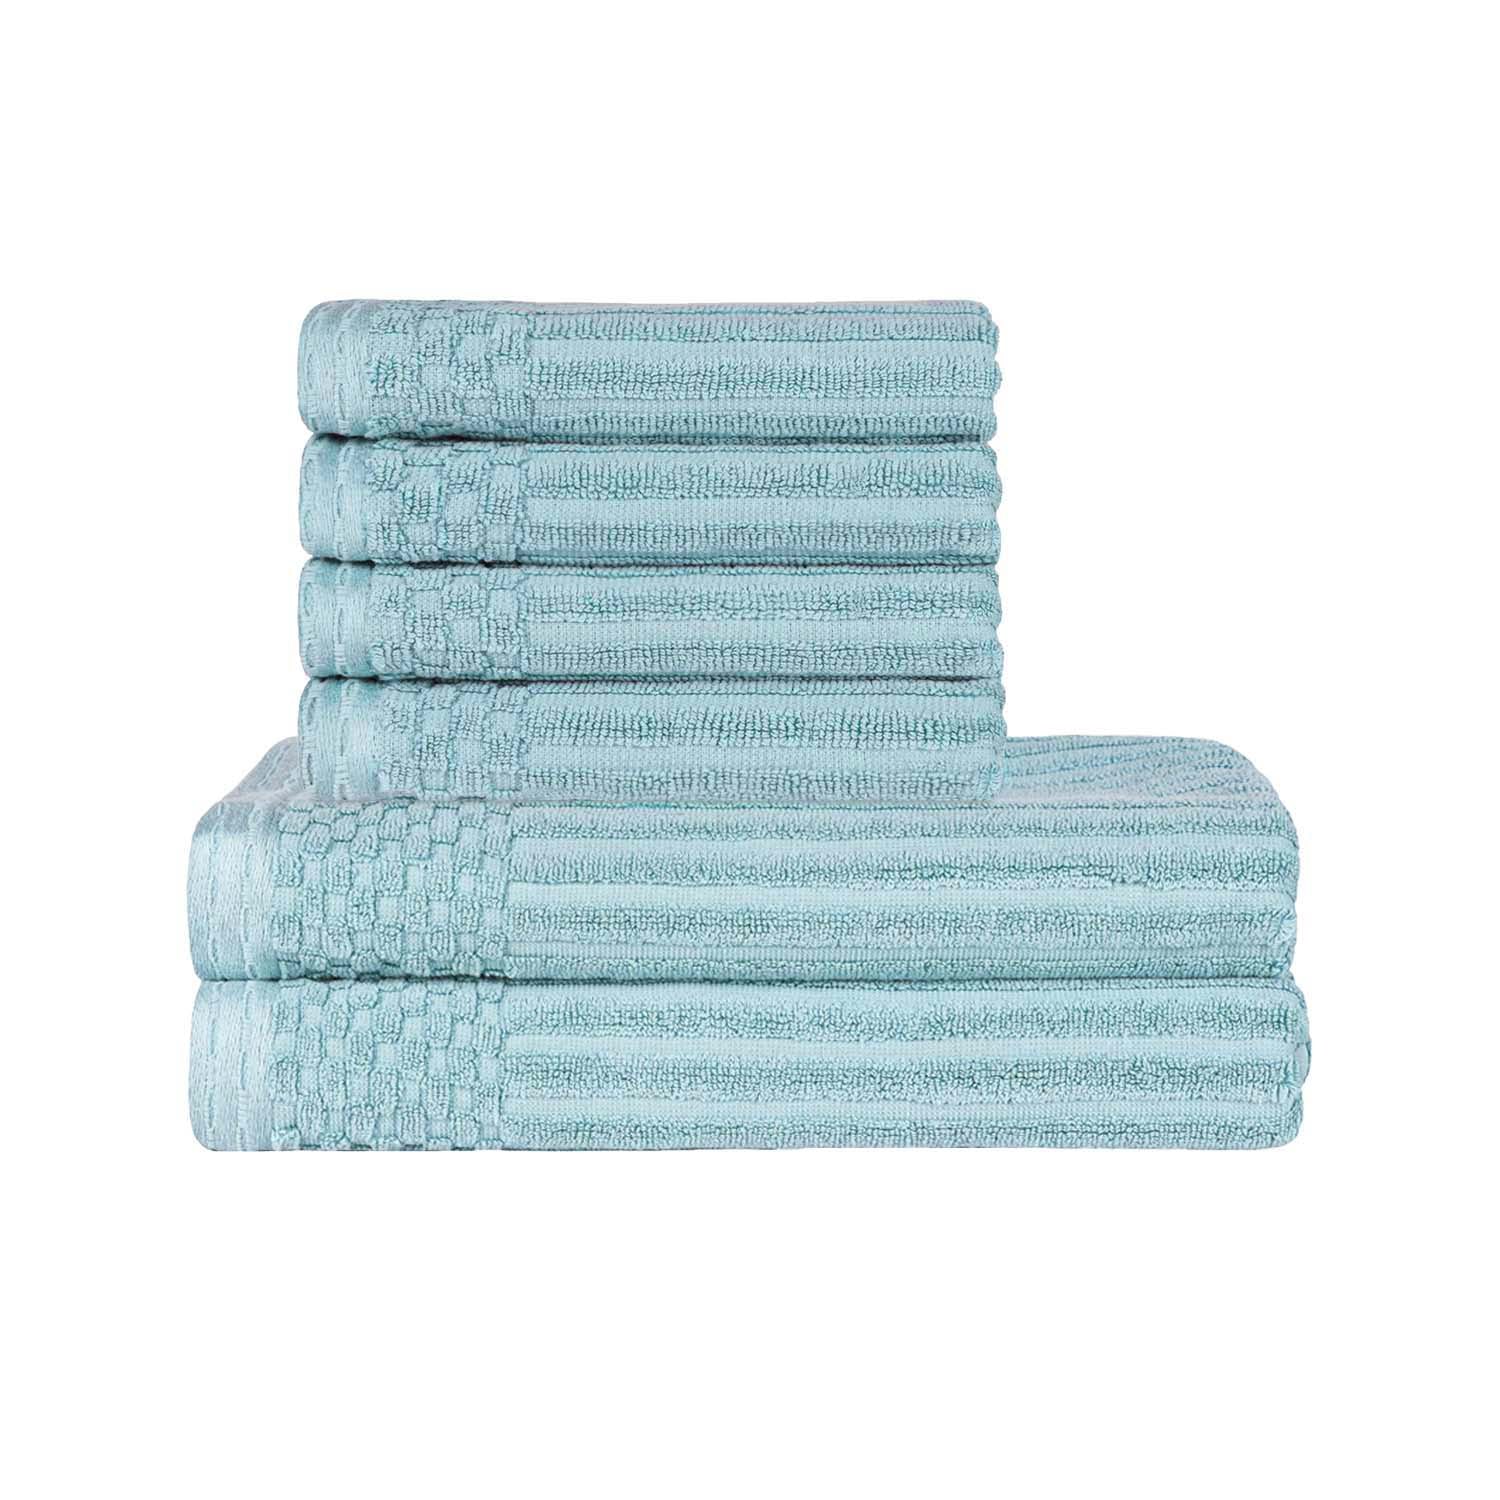 Superior Soho Ribbed Textured Cotton Ultra-Absorbent Hand and Bath Towel Set - Slate Blue